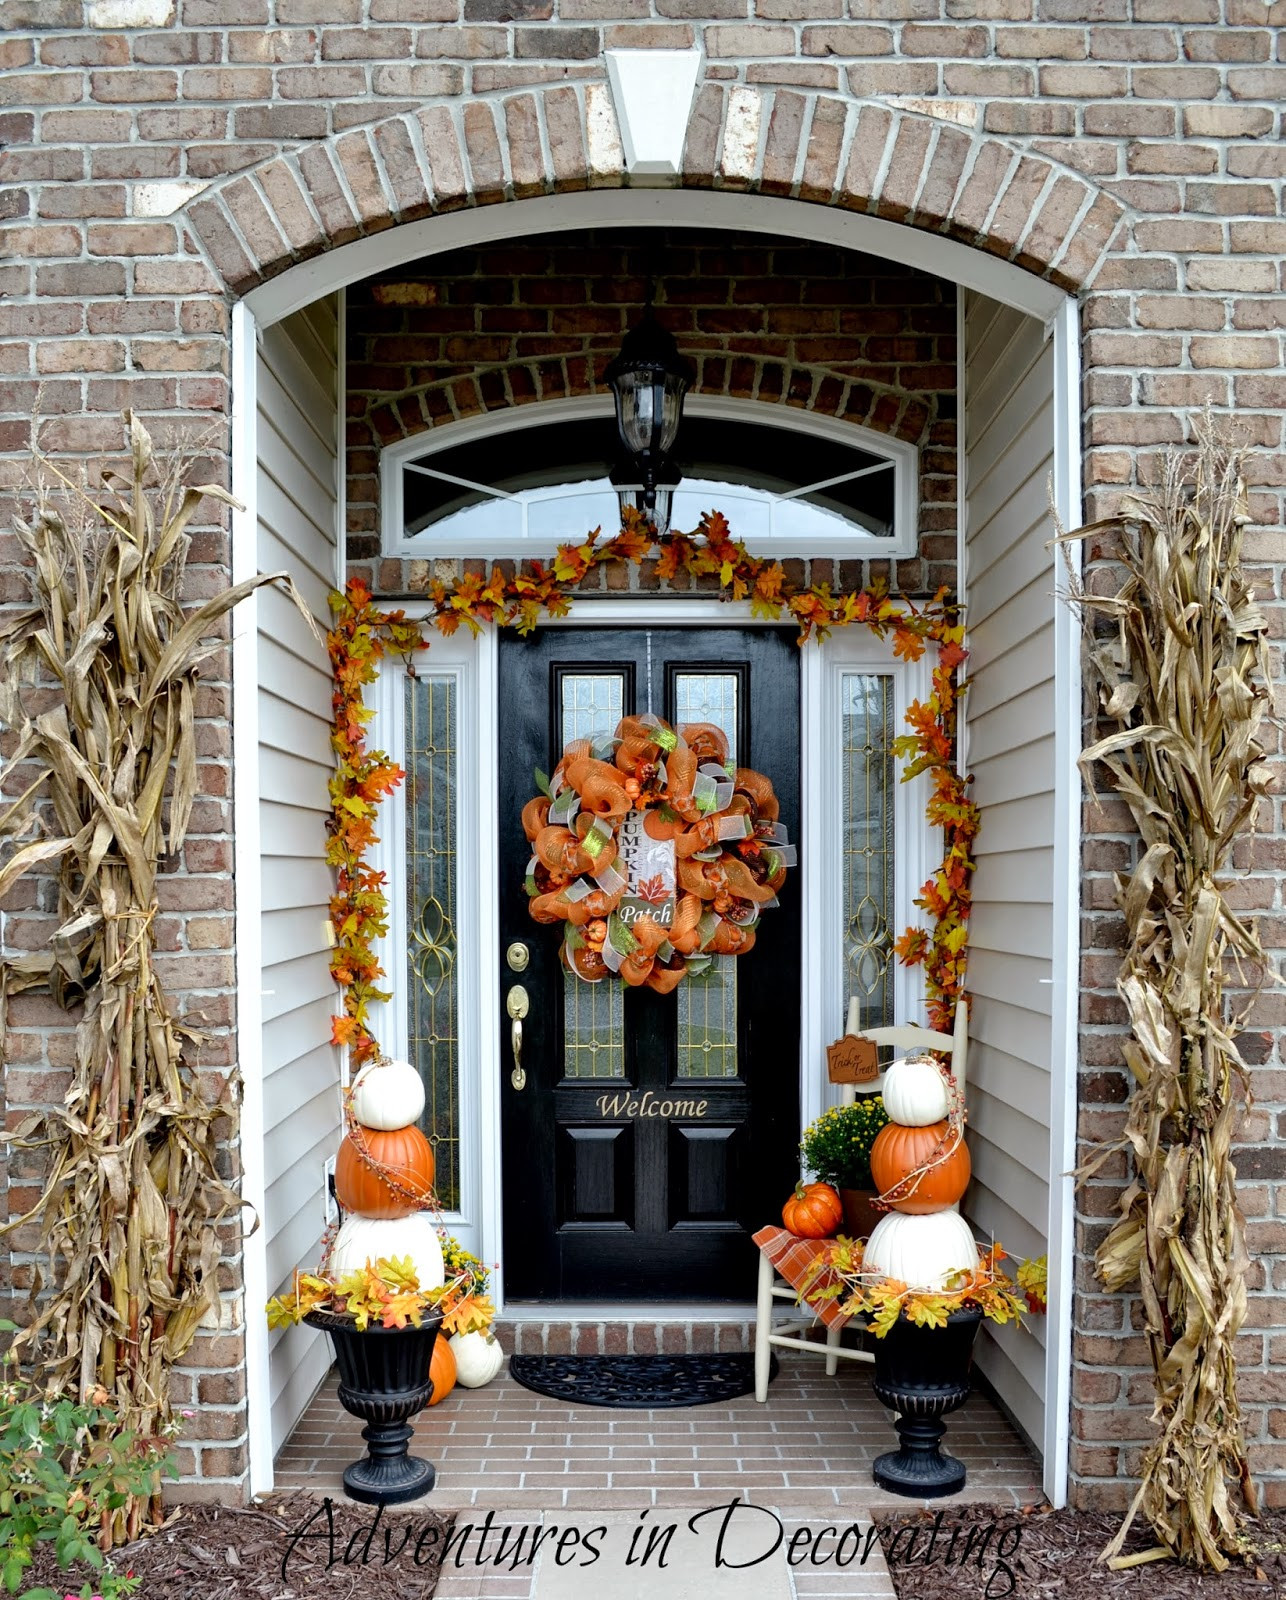 Fall Decor Ideas For Front Porch
 Adventures in Decorating Our Fall Front Porch